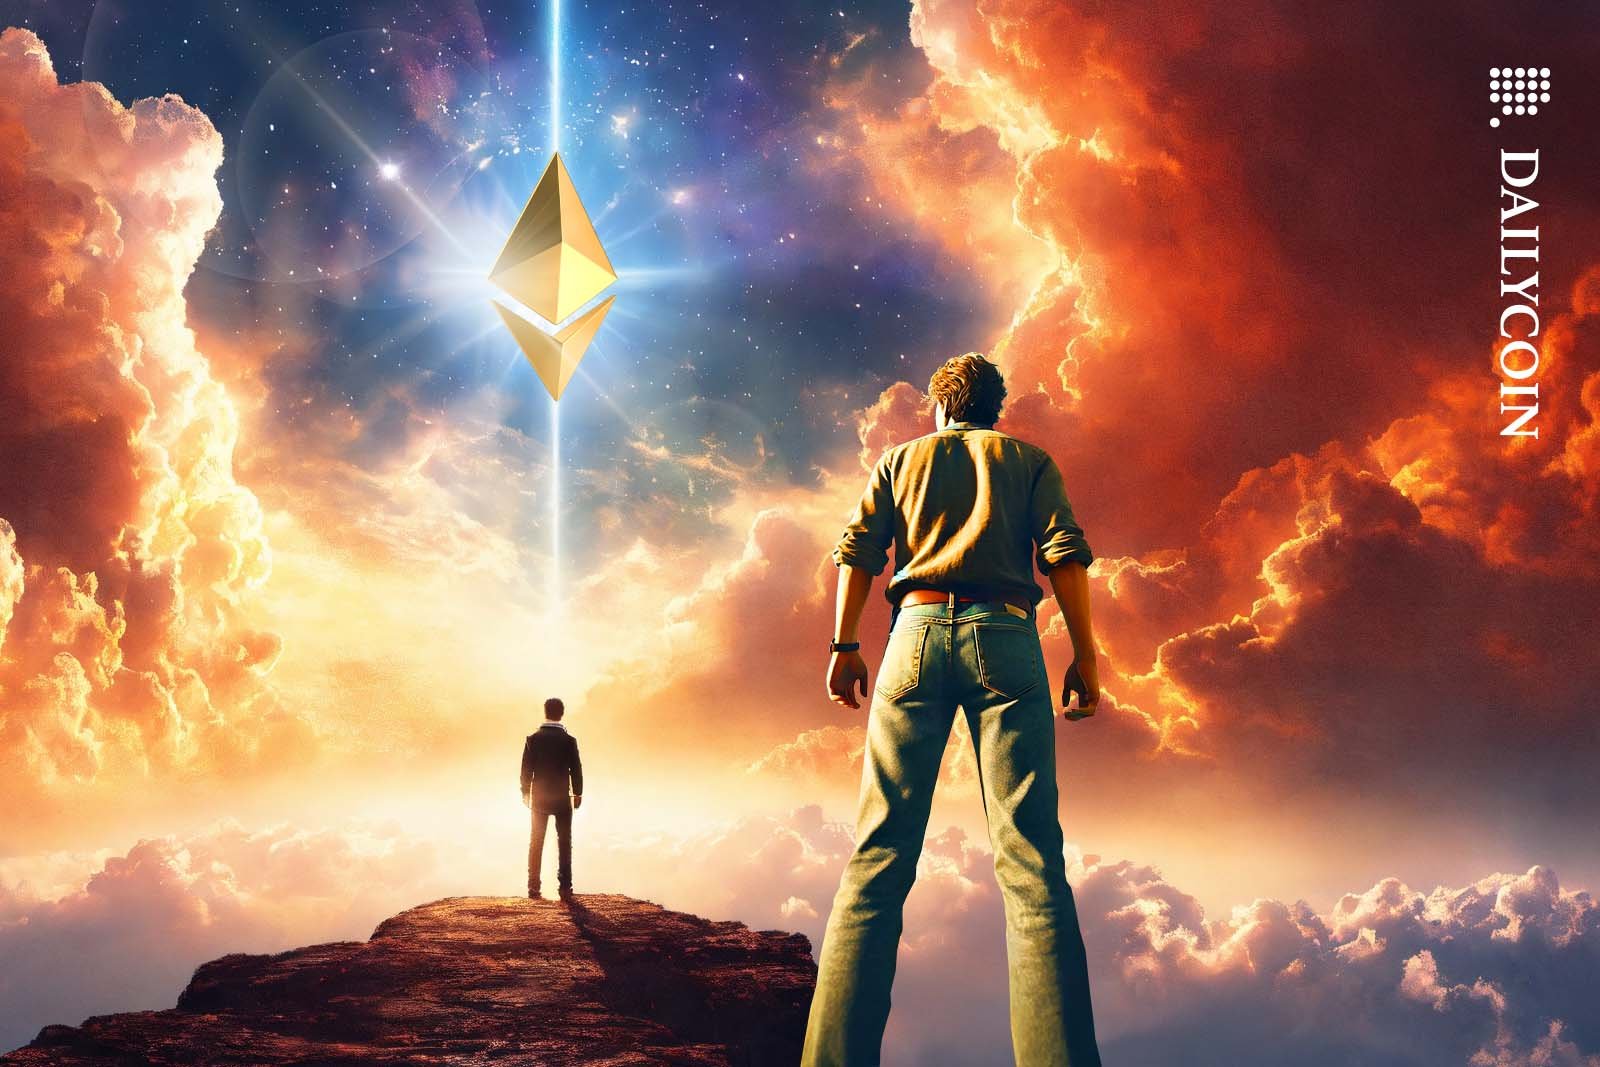 Two men staring at a Ethereum logo on the sky.